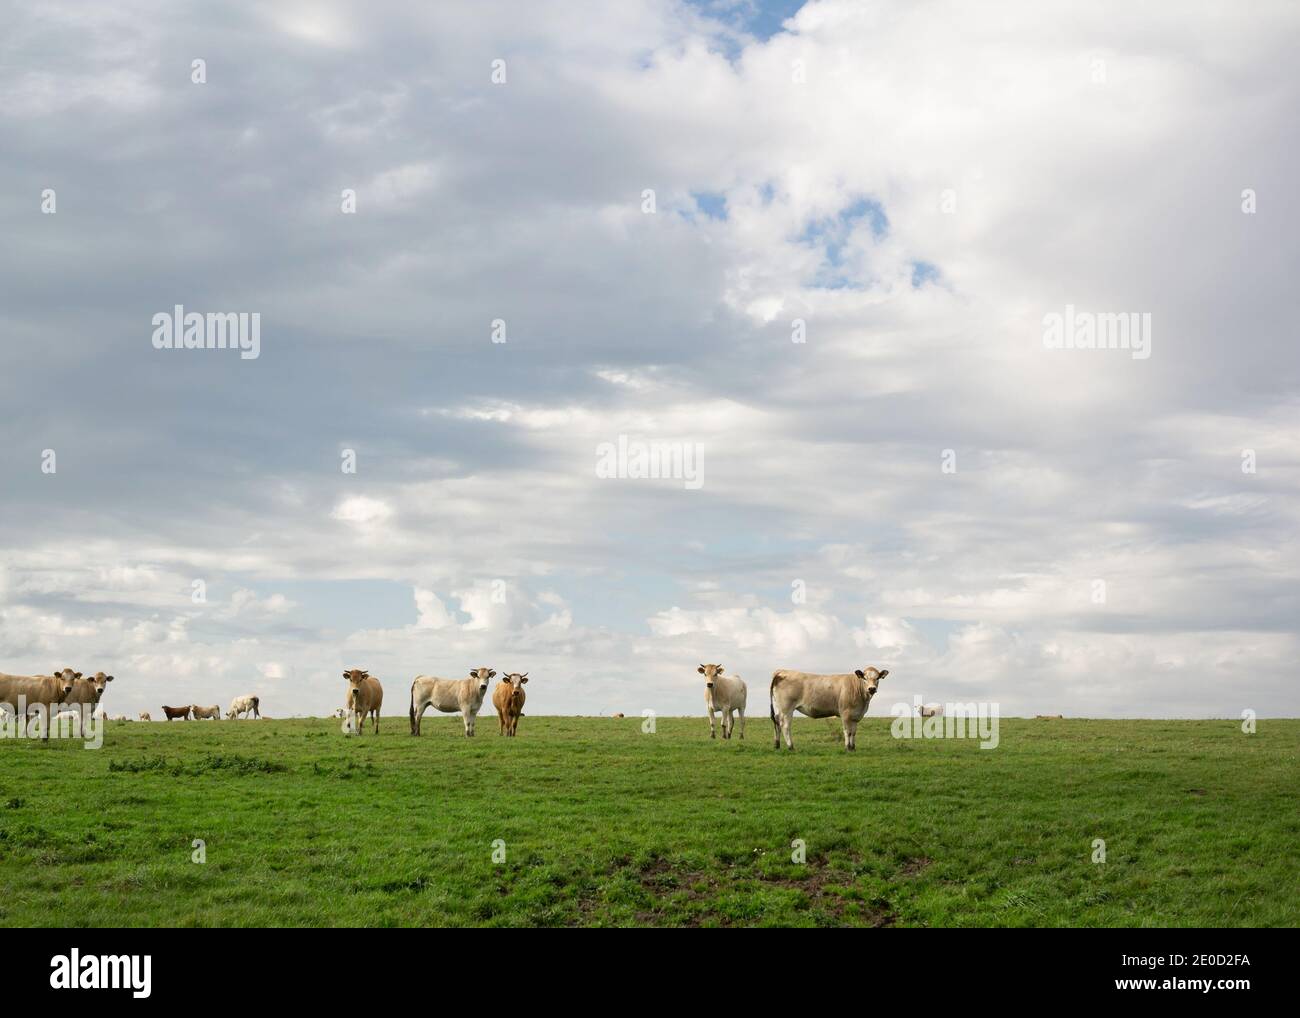 Cows on pasture and grazing land. Flat and plain countryside with cattle and livestock. Minimalist nature with cloudy sky and animals. Stock Photo